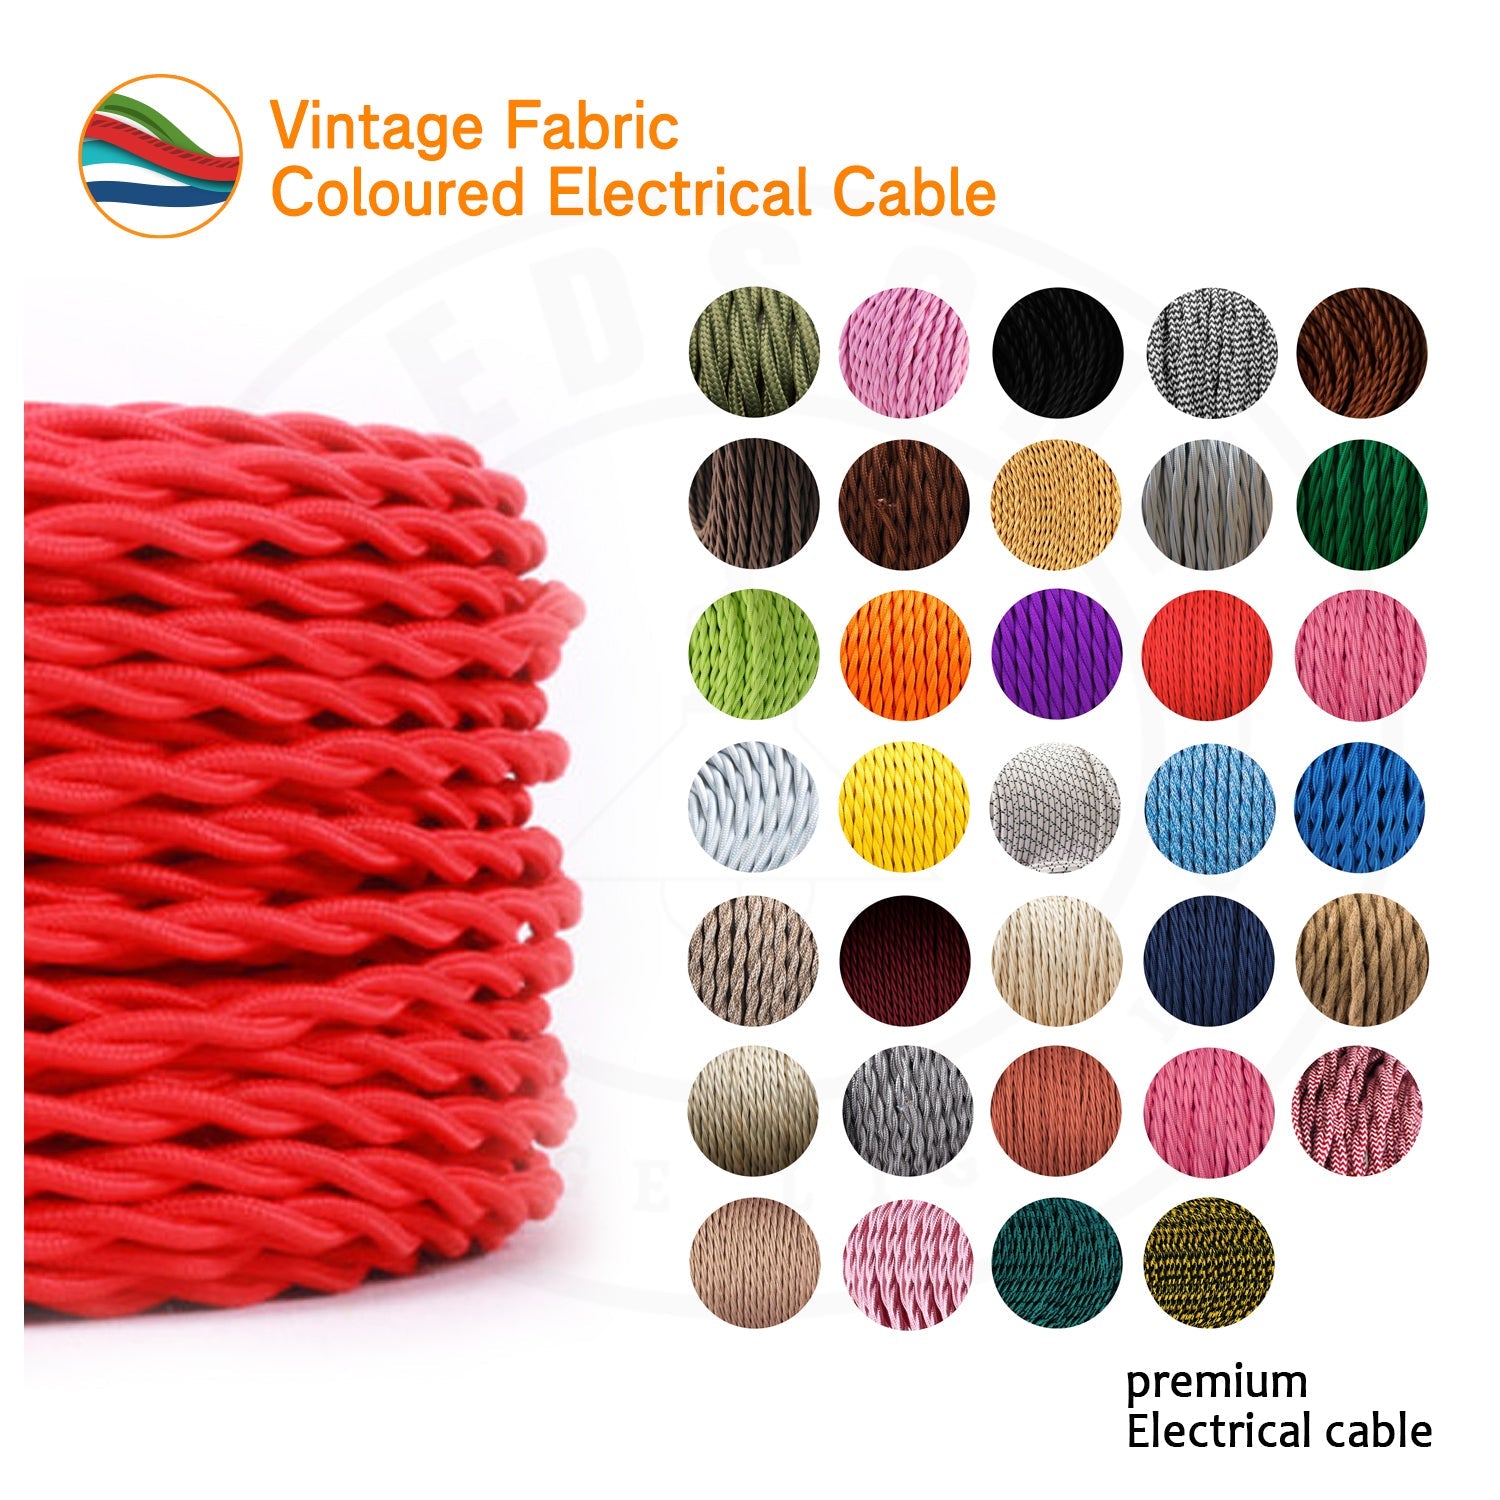 10m 3 Core Twisted Electric Cable Covered Red And White Color Fabric 0.75mm~4850